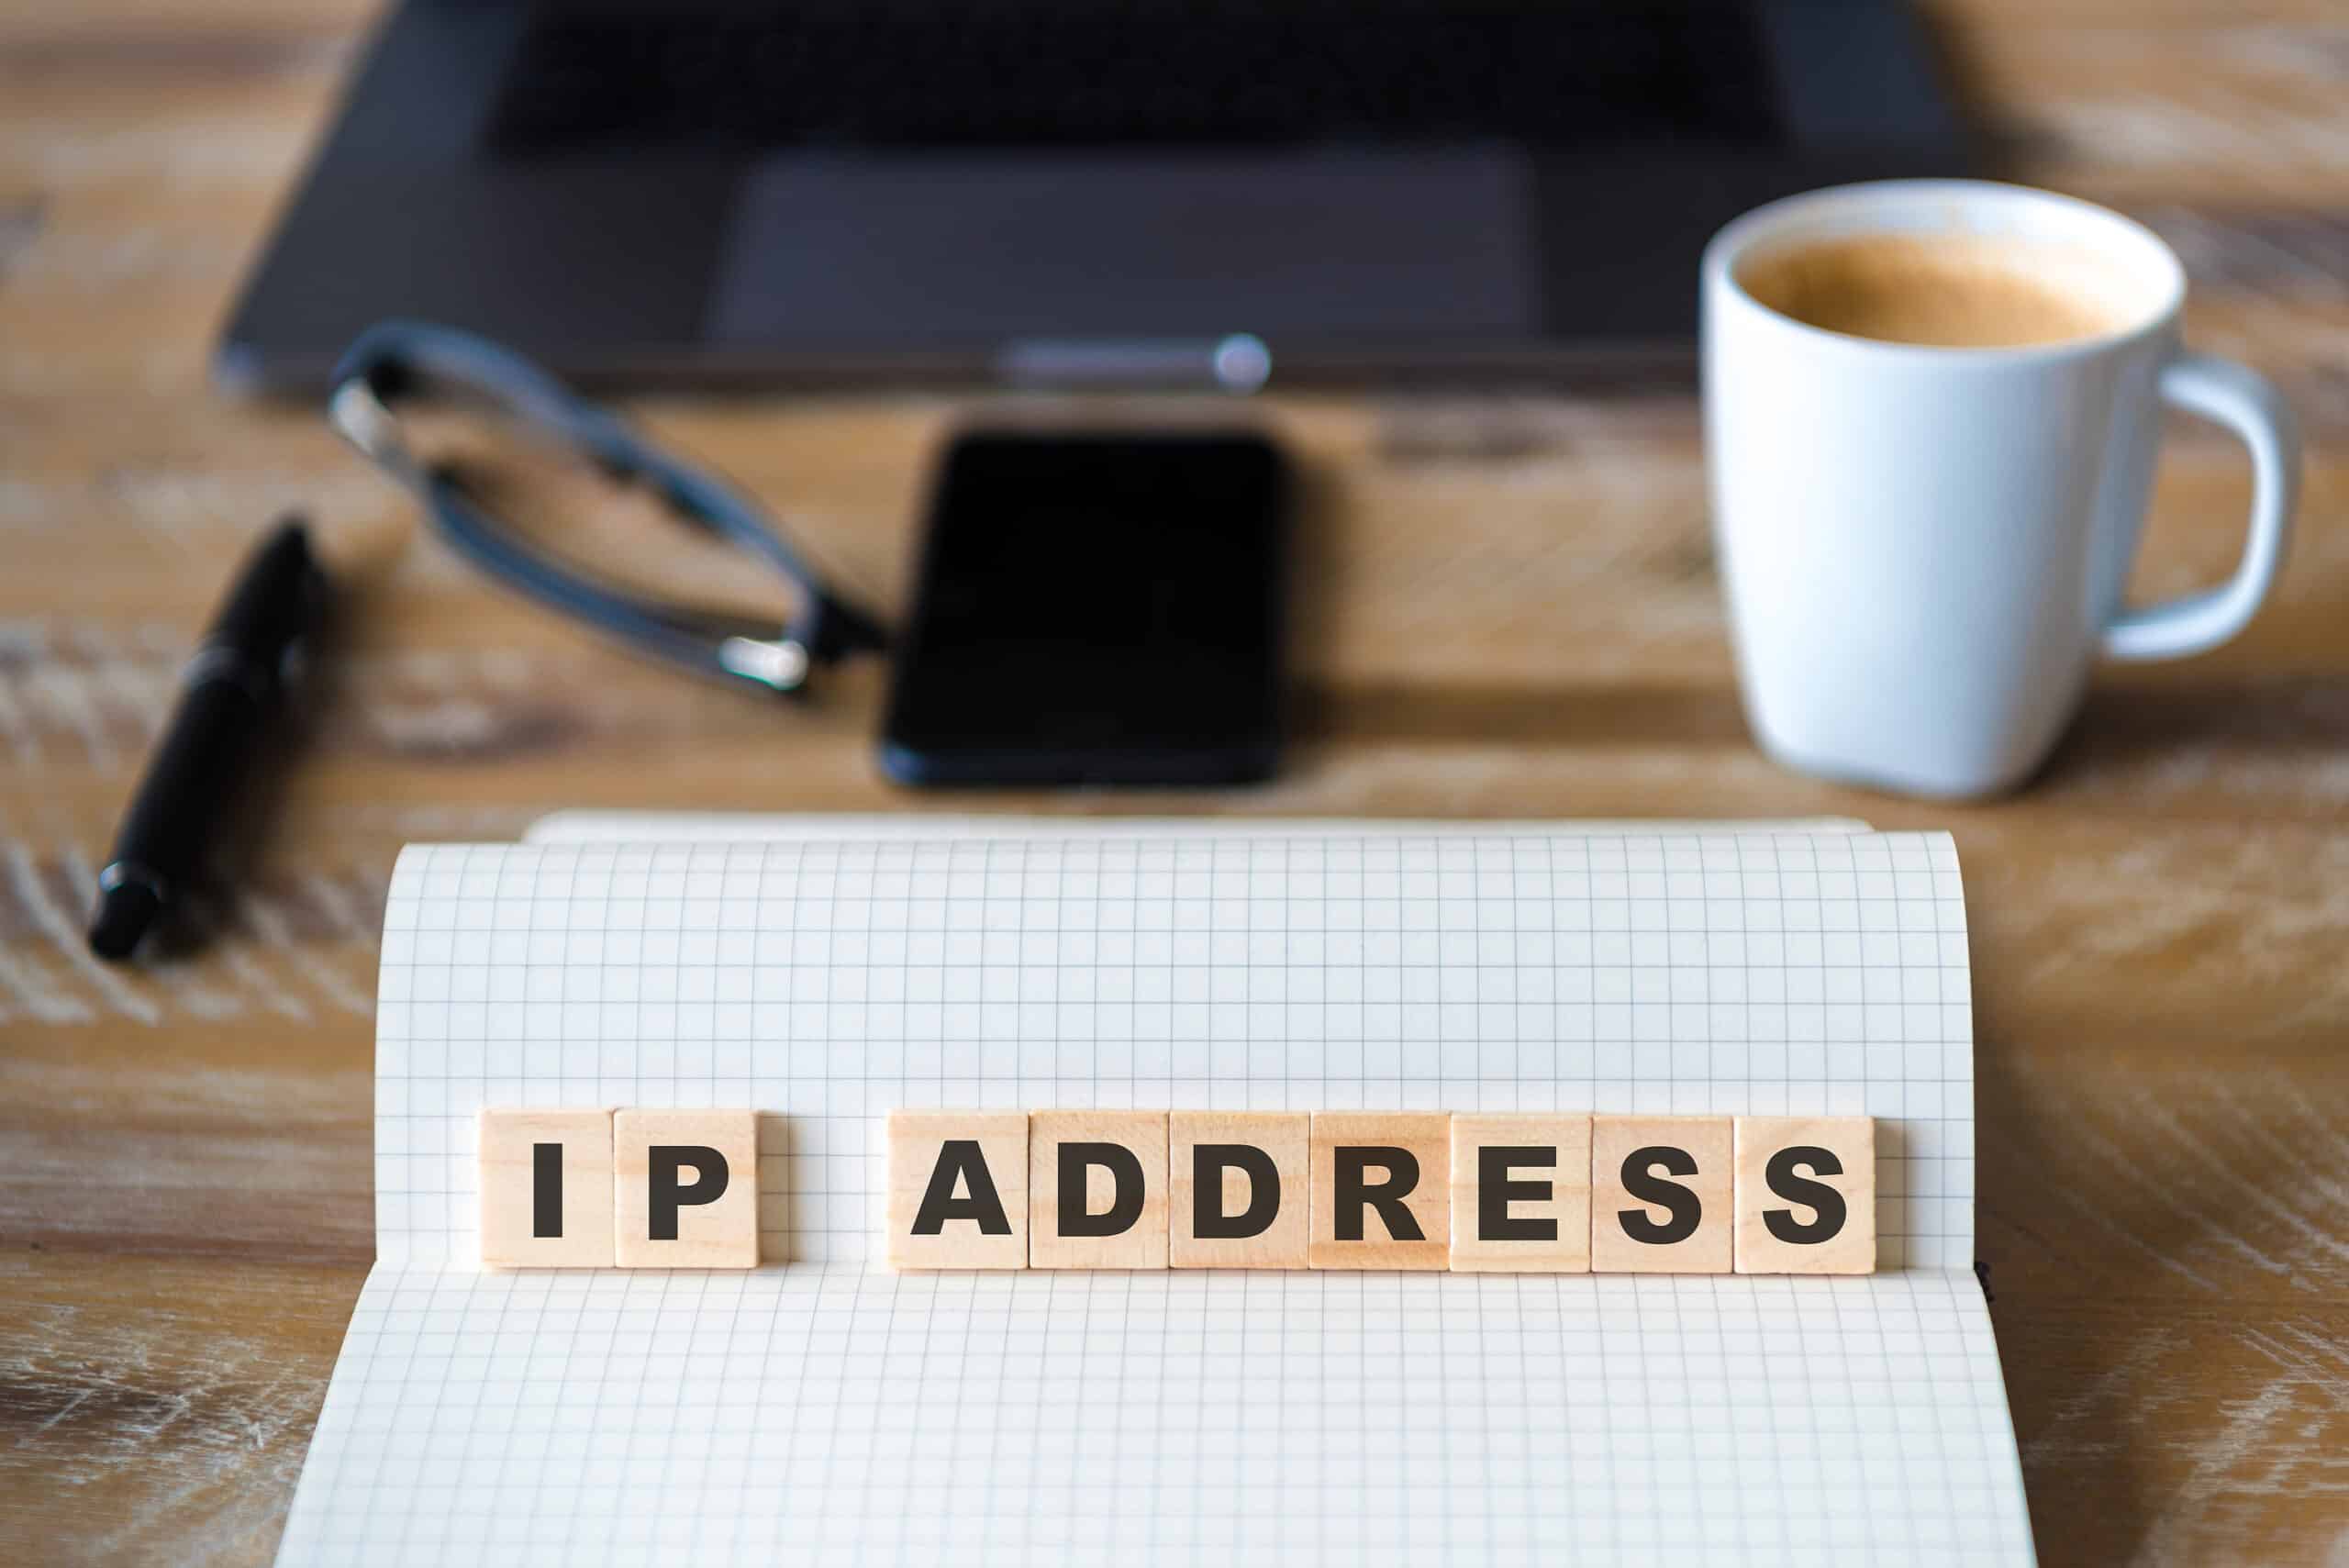 the word ip address spelled with scrabble tiles next to a cup of coffee